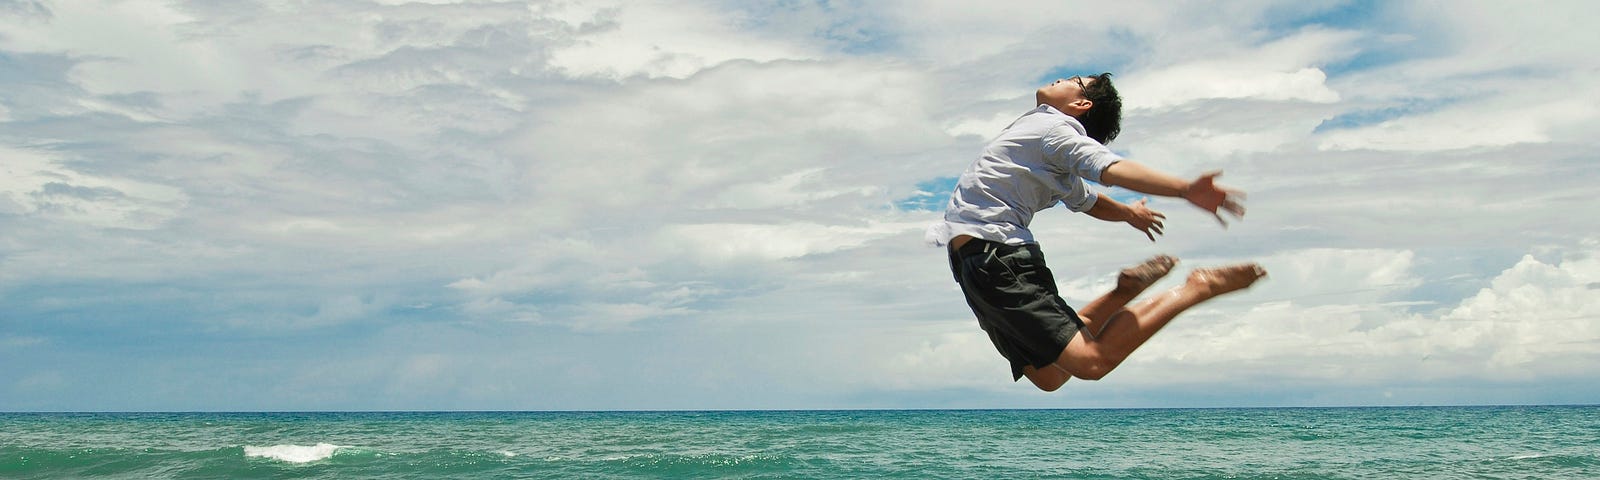 A man is photographed while he has jumped mid air.